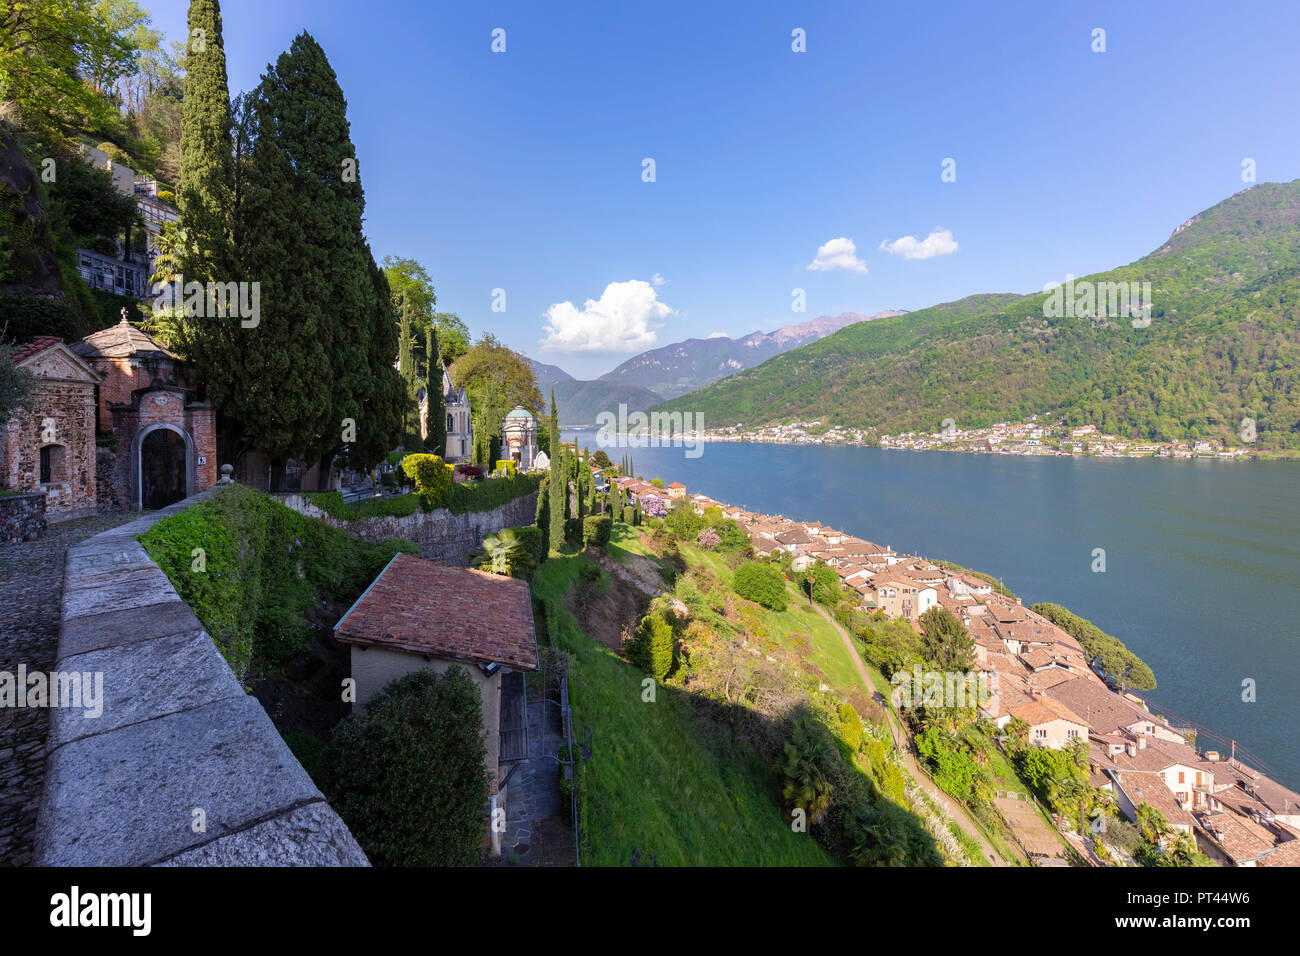 Balcony on the rooftops of Morcote and Lake Ceresio, Morcote, Canton Ticino, Switzerland, Stock Photo